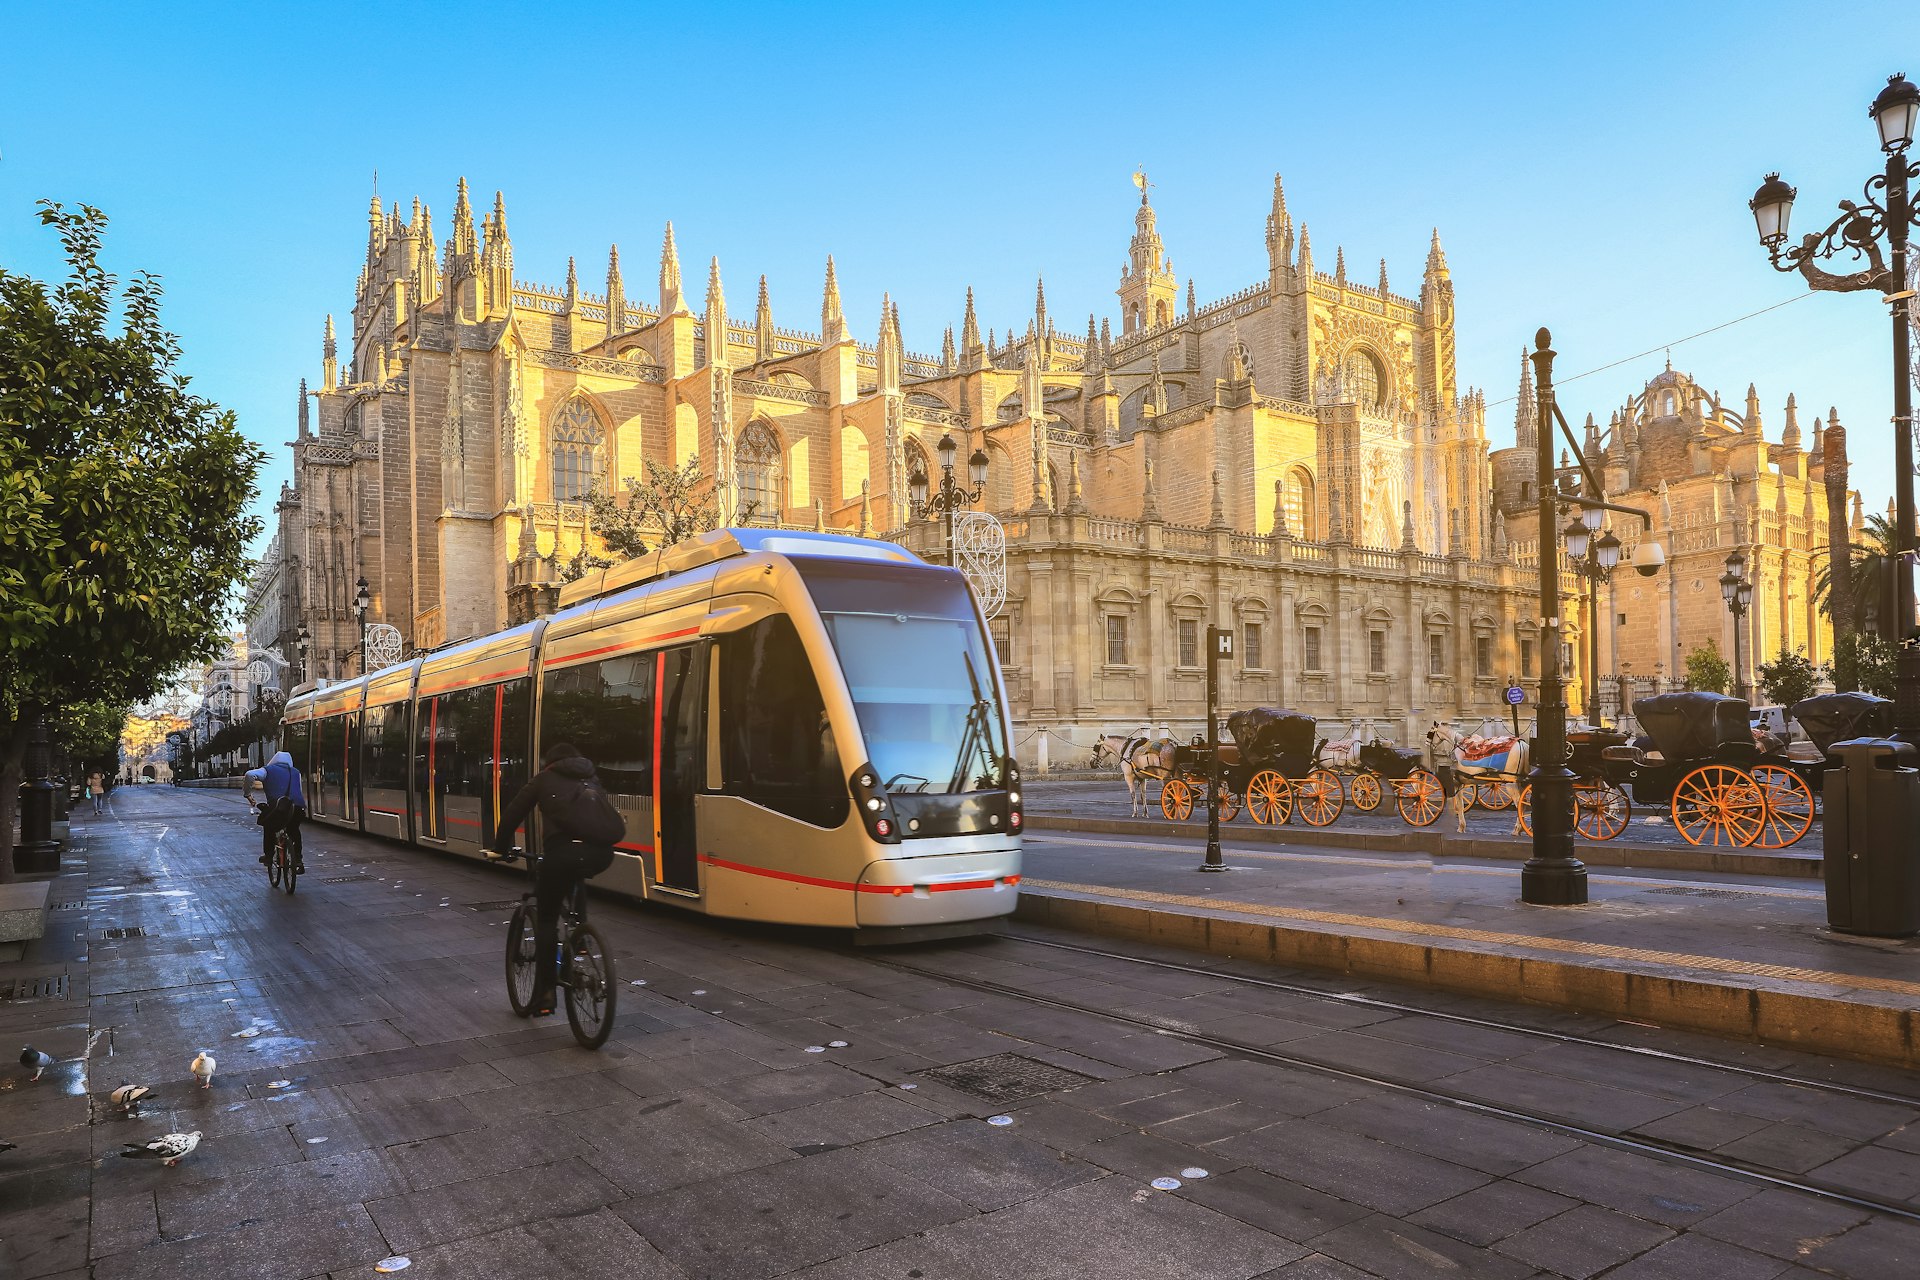 A tram passes in front of a huge Gothic cathedral building on a sunny day